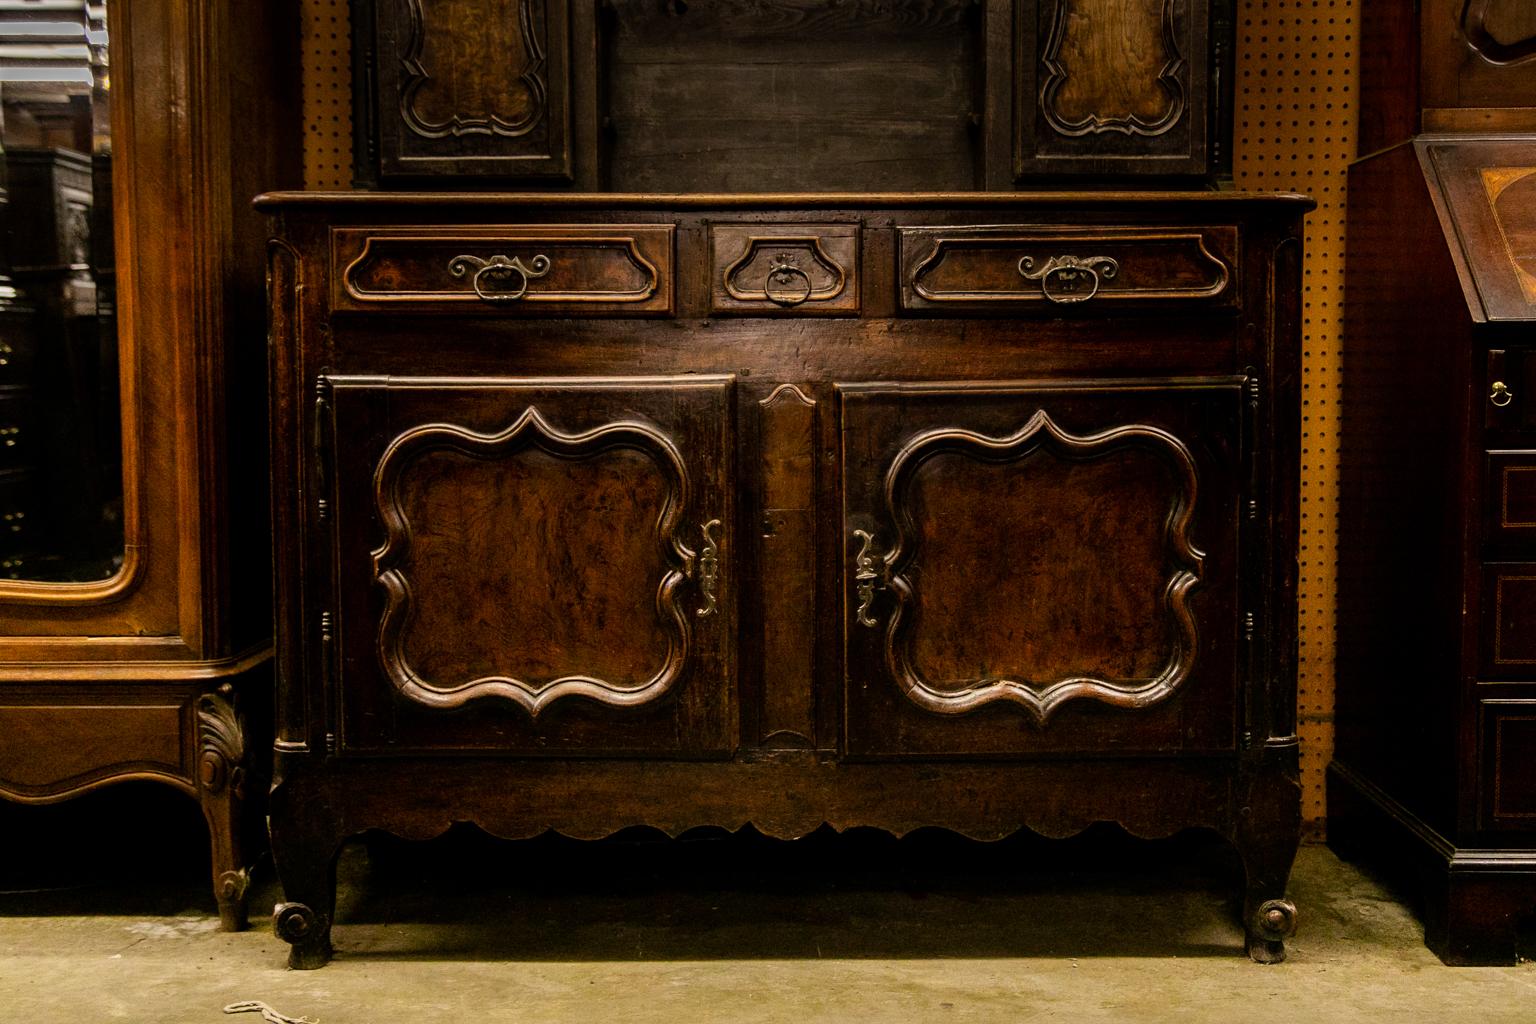 The upper portion of this vassiliere has double pegged construction and has an overhanging cornice with turned pendants. The doors have recessed panels framed with carved scalloped moldings. The lower doors have recessed panels framed with carved